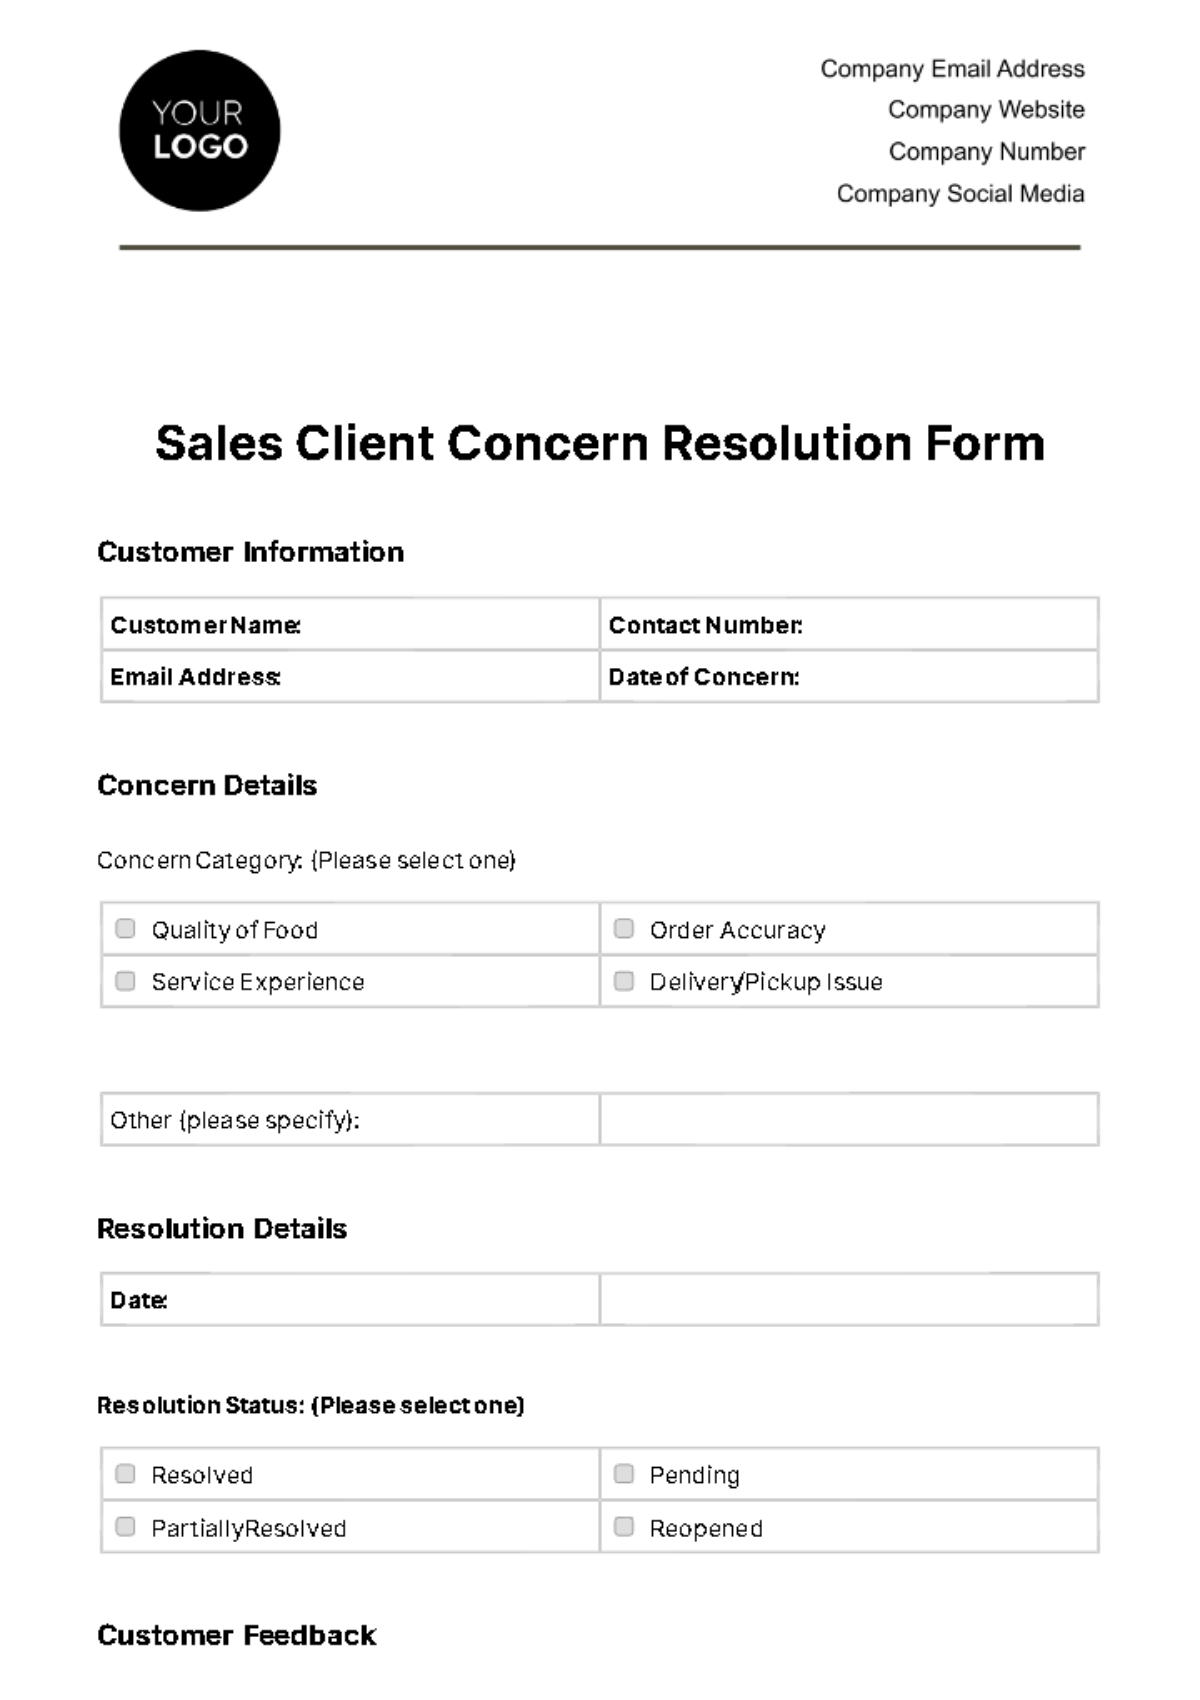 Sales Client Concern Resolution Form Template